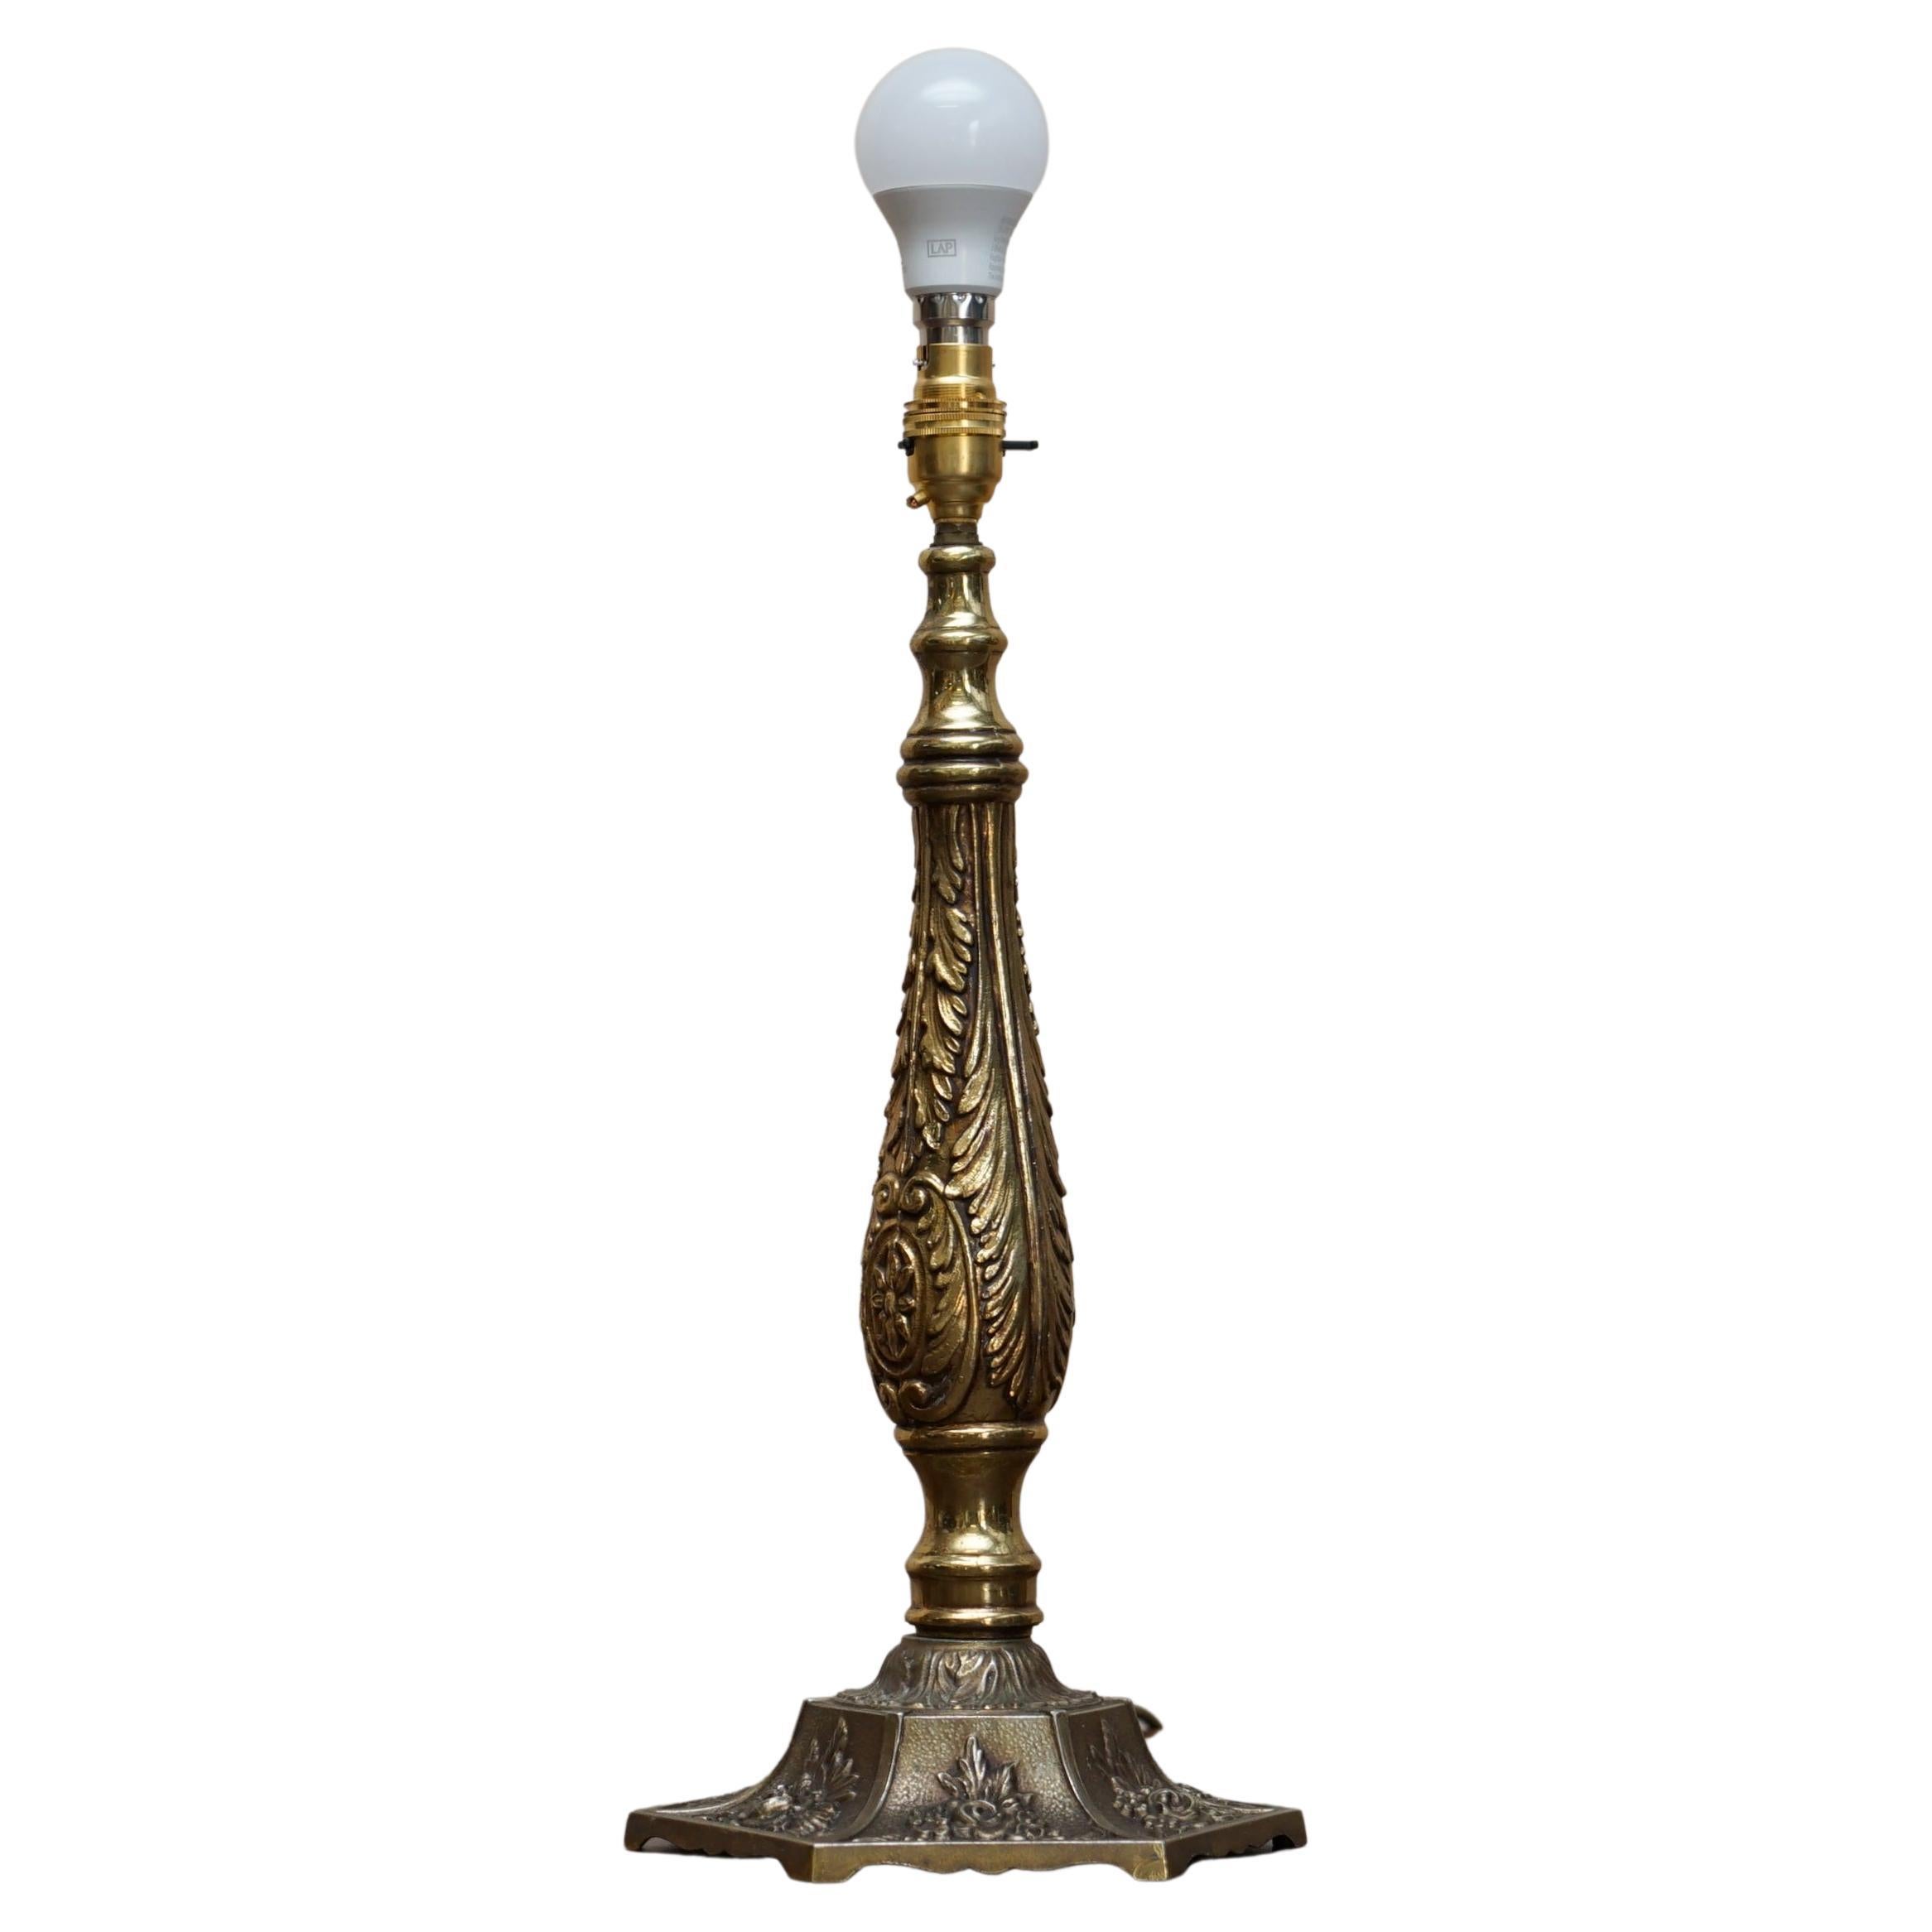 Stunning Victorian Repousse Brass Table Lamp Very Decorative & Beautifully Cast